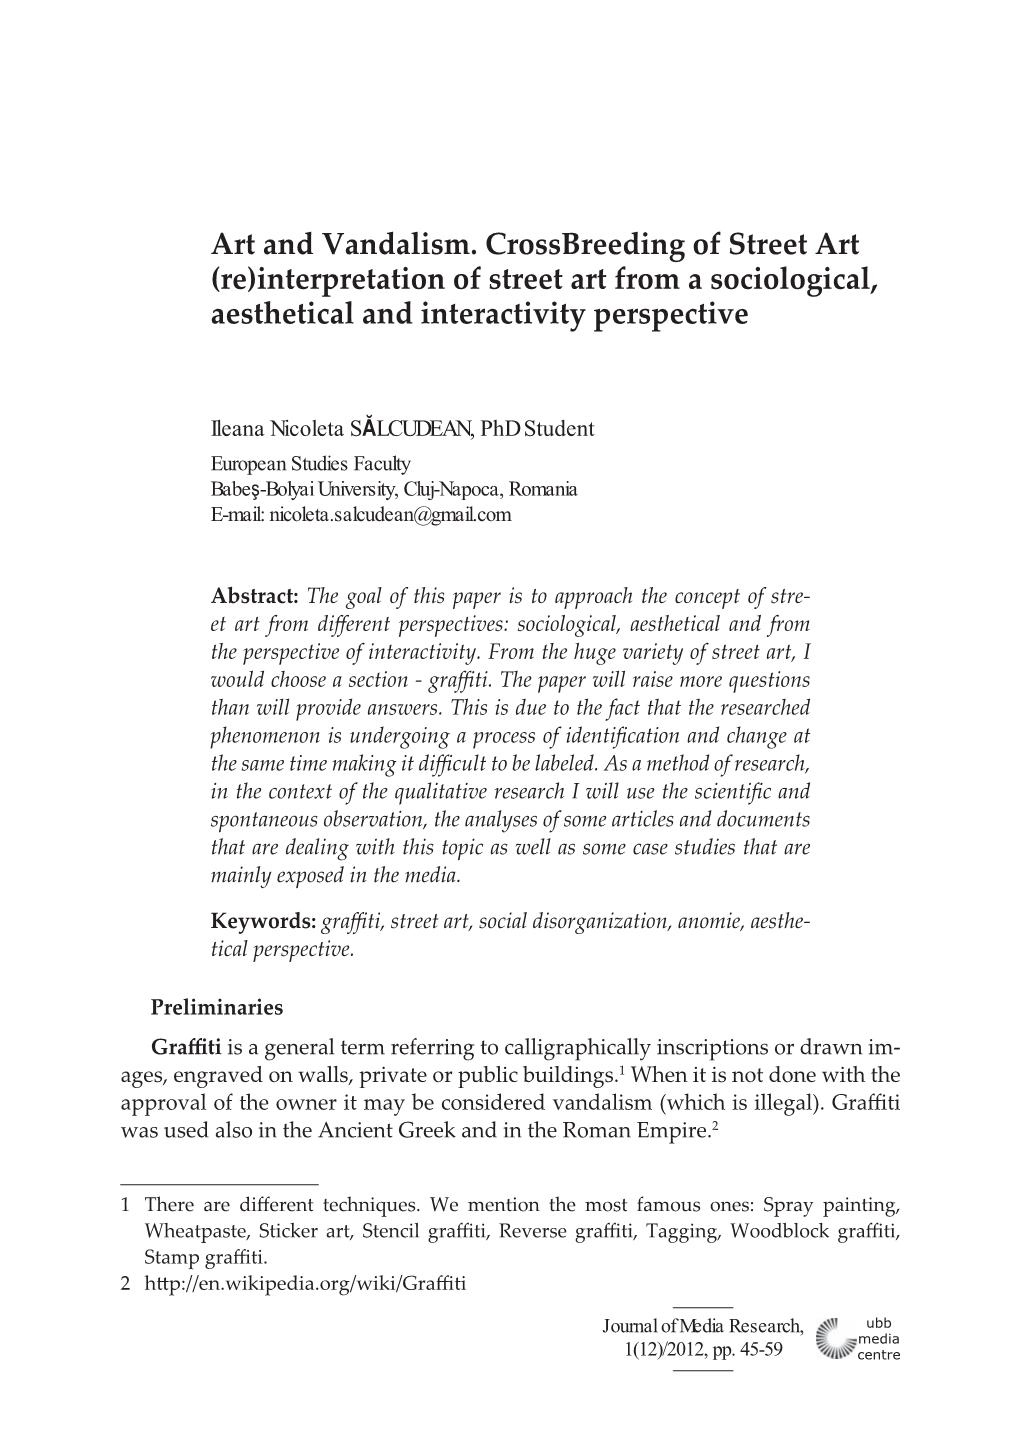 Interpretation of Street Art from a Sociological, Aesthetical and Interactivity Perspective